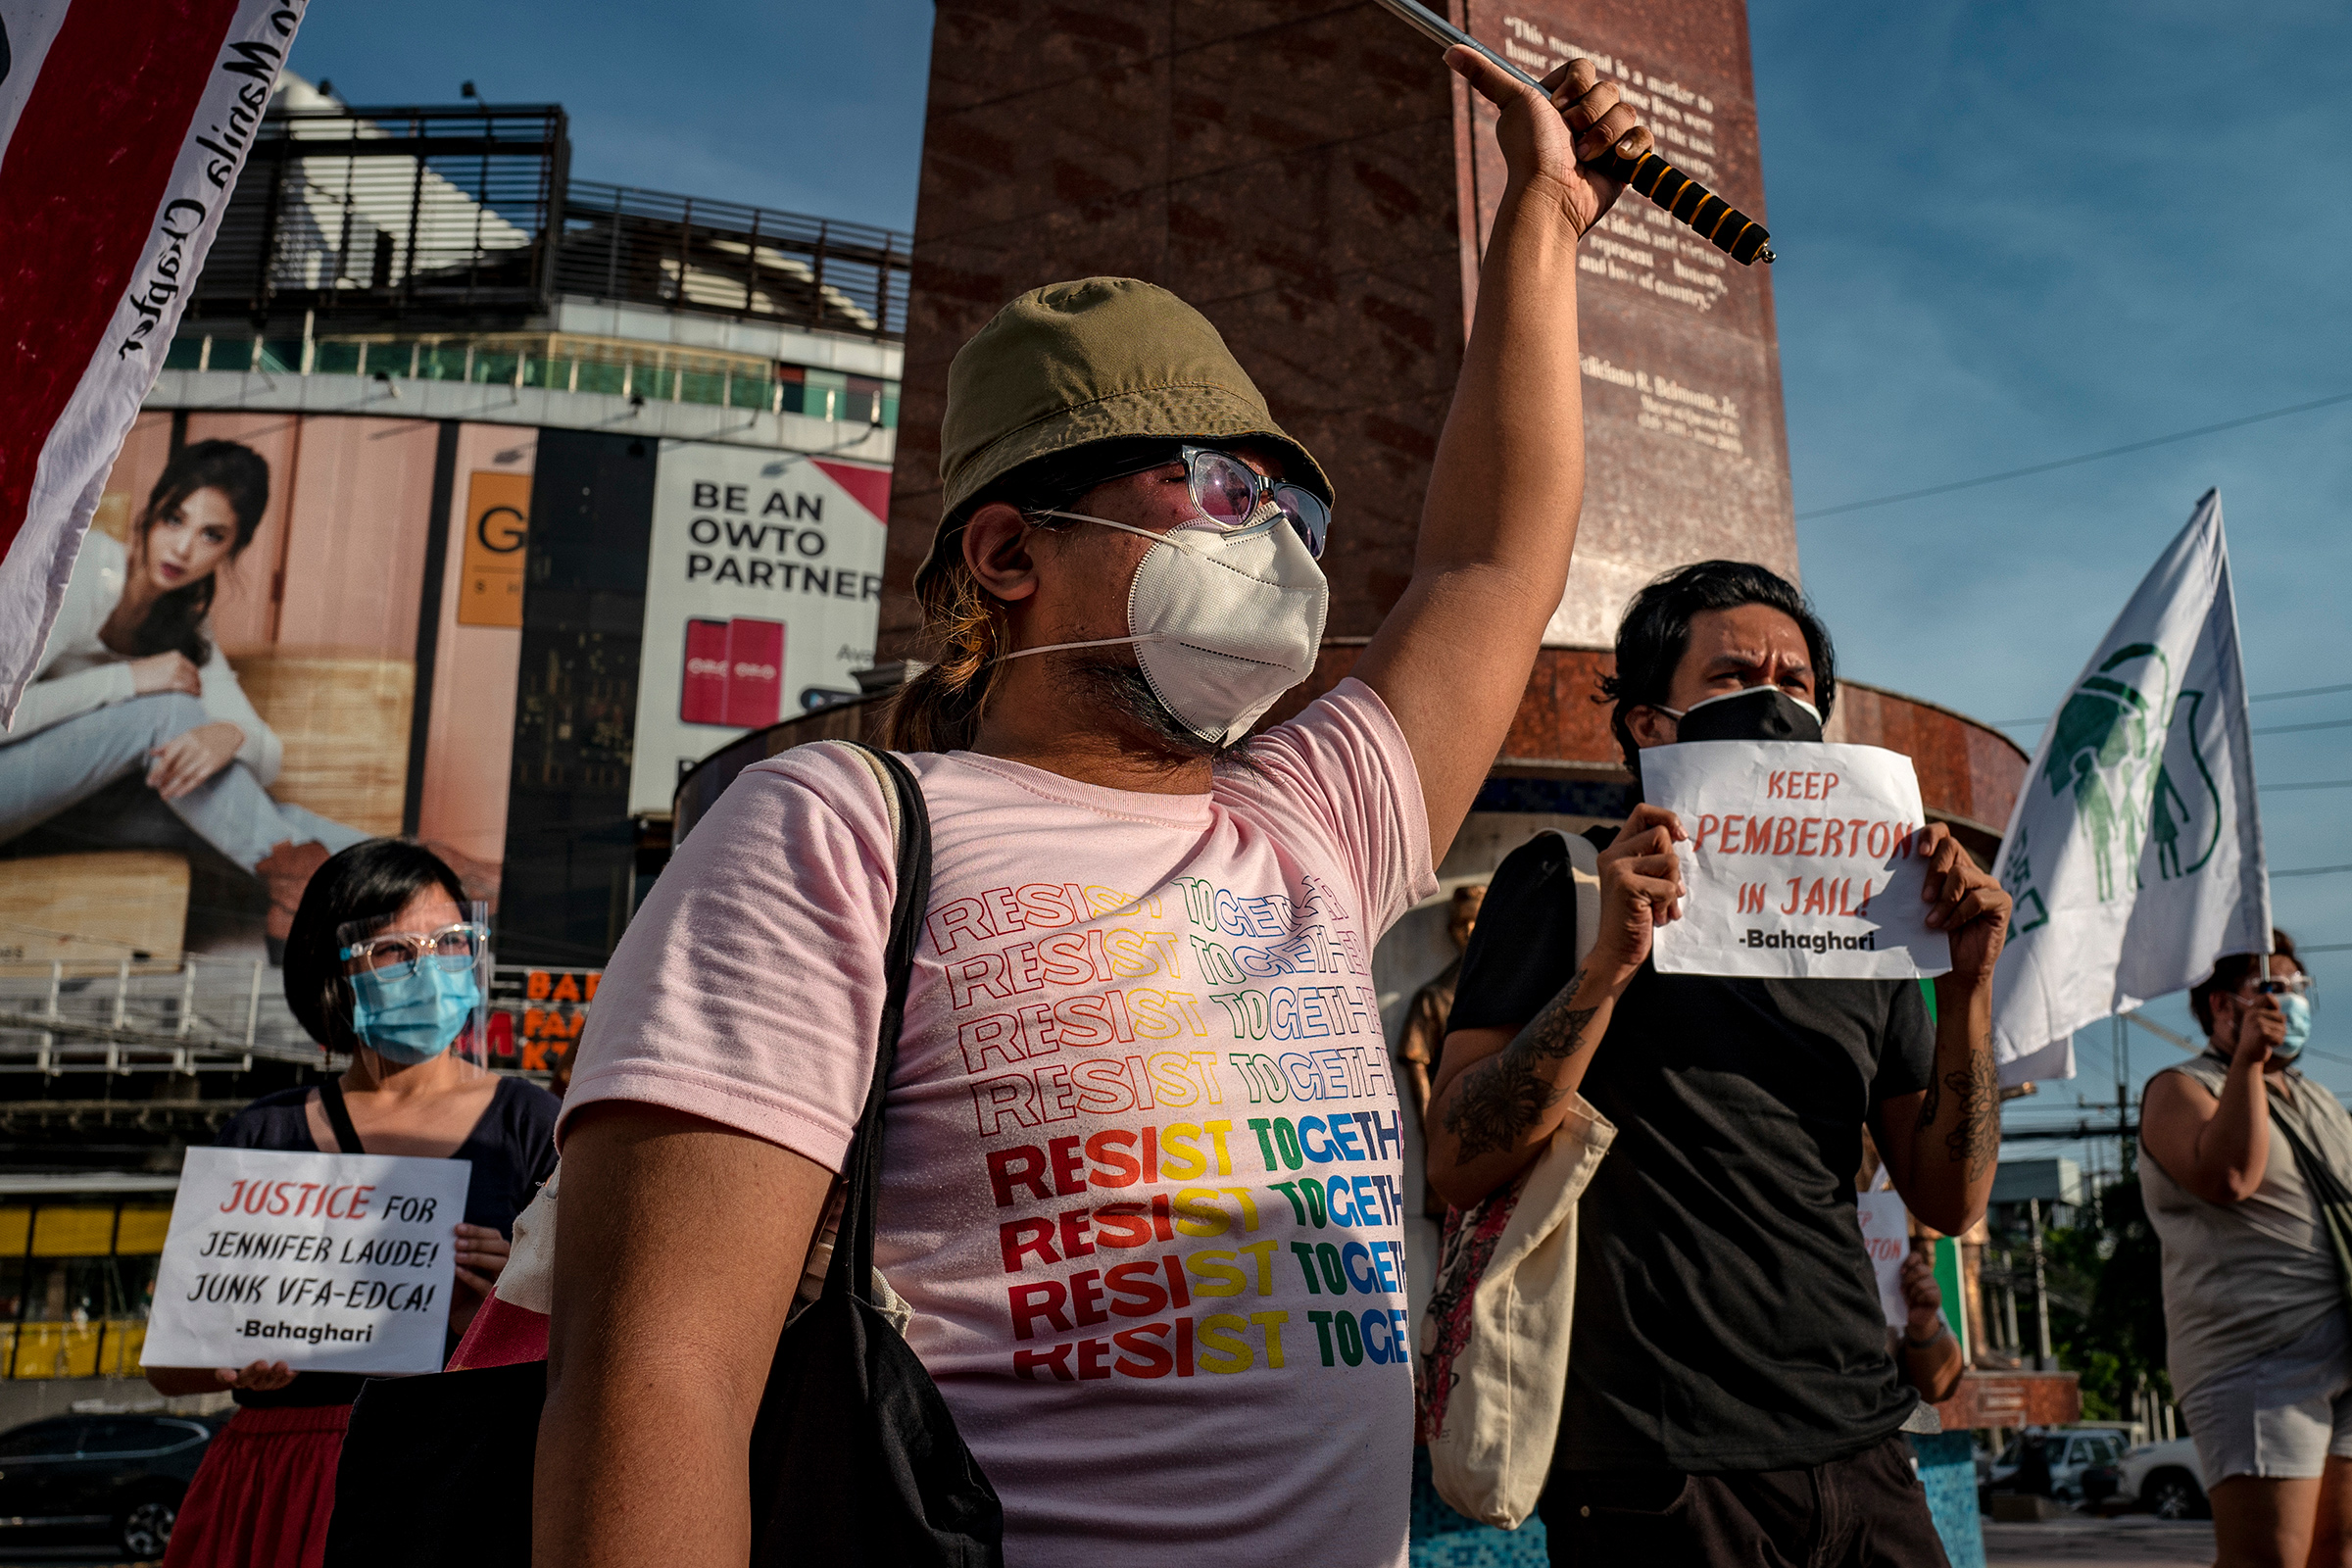 People protest the clemency granted to a US Marine who was convicted in 2014 of killing a Filipina transgender woman, in Quezon City, on Sept. 8, 2020. (Ezra Acayan—Getty Images)